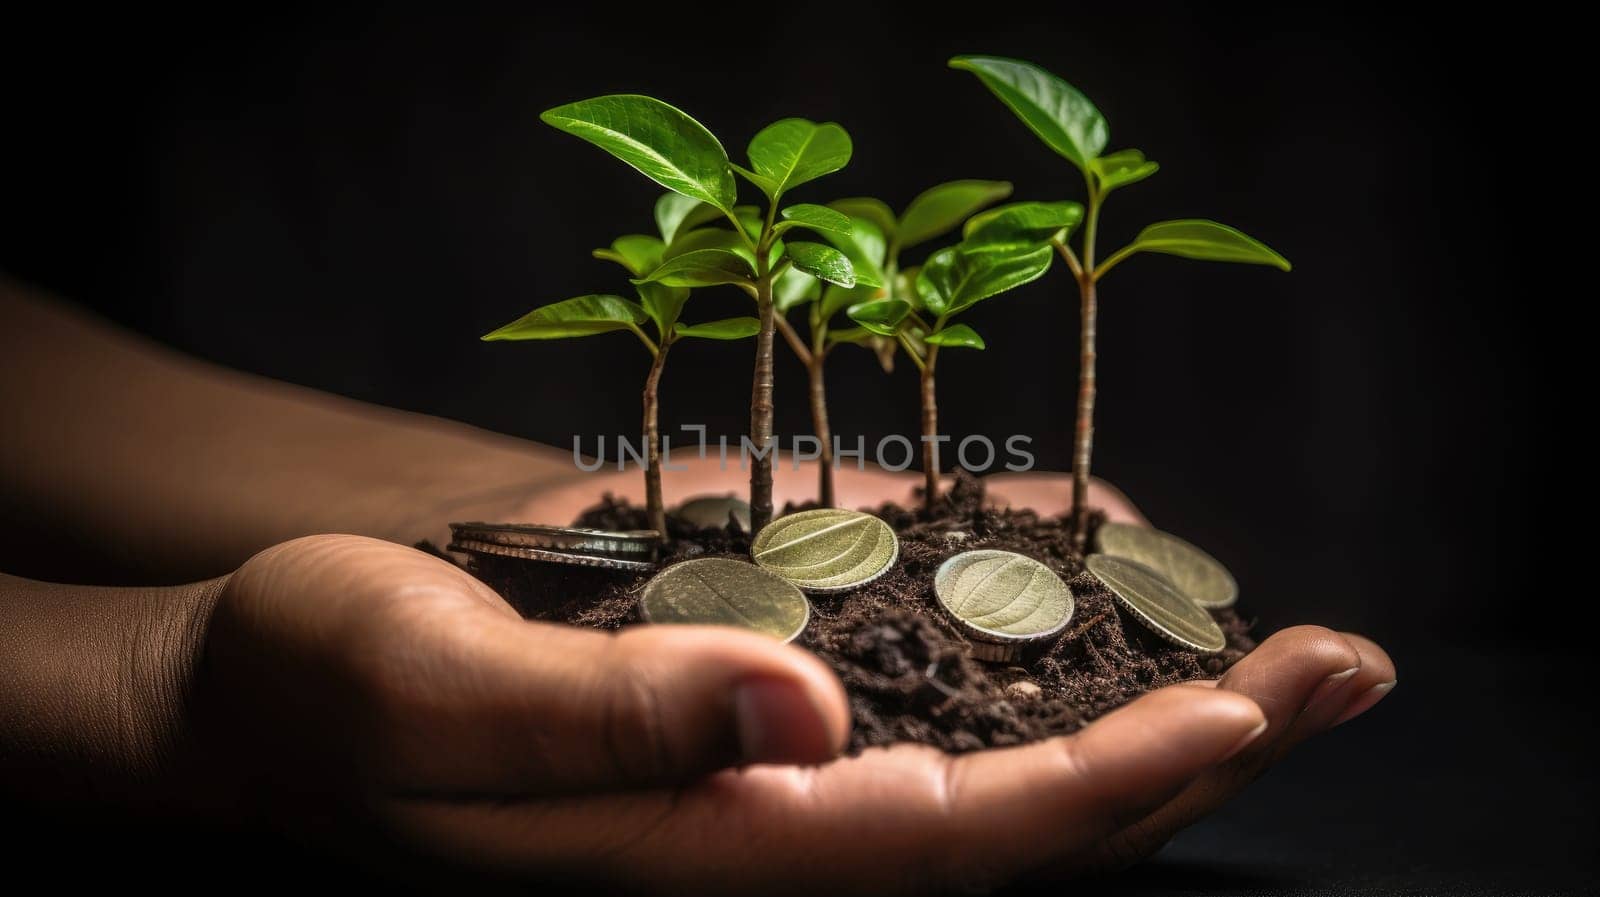 Sapling Emerging from Hand Grasping Silver Coins. Illustrating Green Business Concepts for Finance and Investment. Symbolic Image of Carbon Credits and Eco-Friendly Taxation Strategies for a Greener